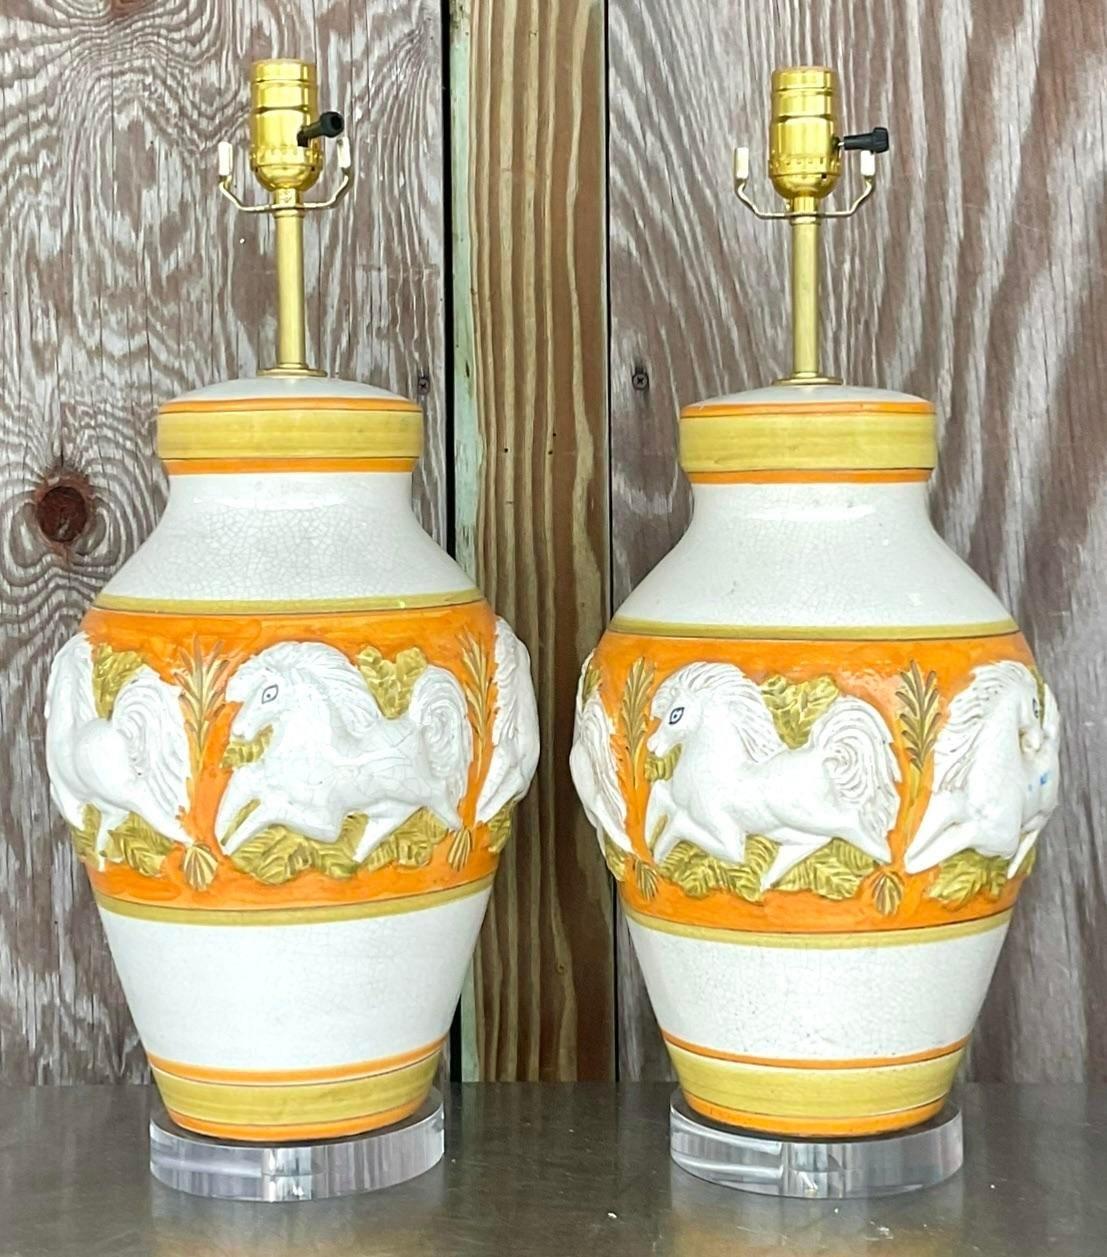 Vintage Mid-Century Modern Glazed Ceramic Prancing Horse Lamps - a Pair In Good Condition For Sale In west palm beach, FL